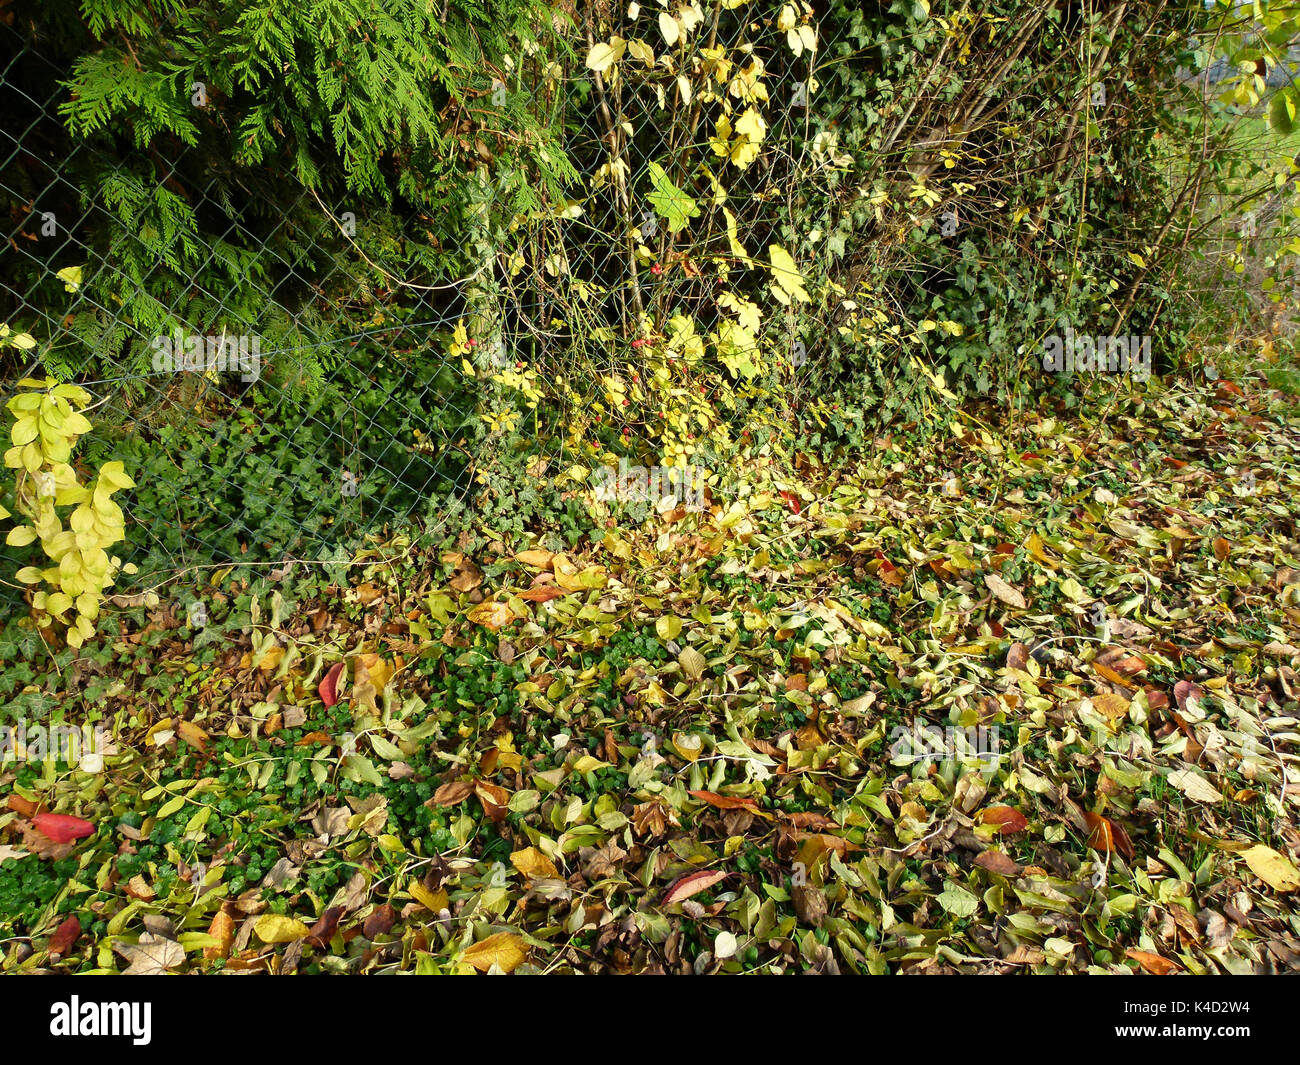 Nature Still Shows Itself From Its Colorful Side, Colorful Autumn Leaves Lying On The Ground Stock Photo